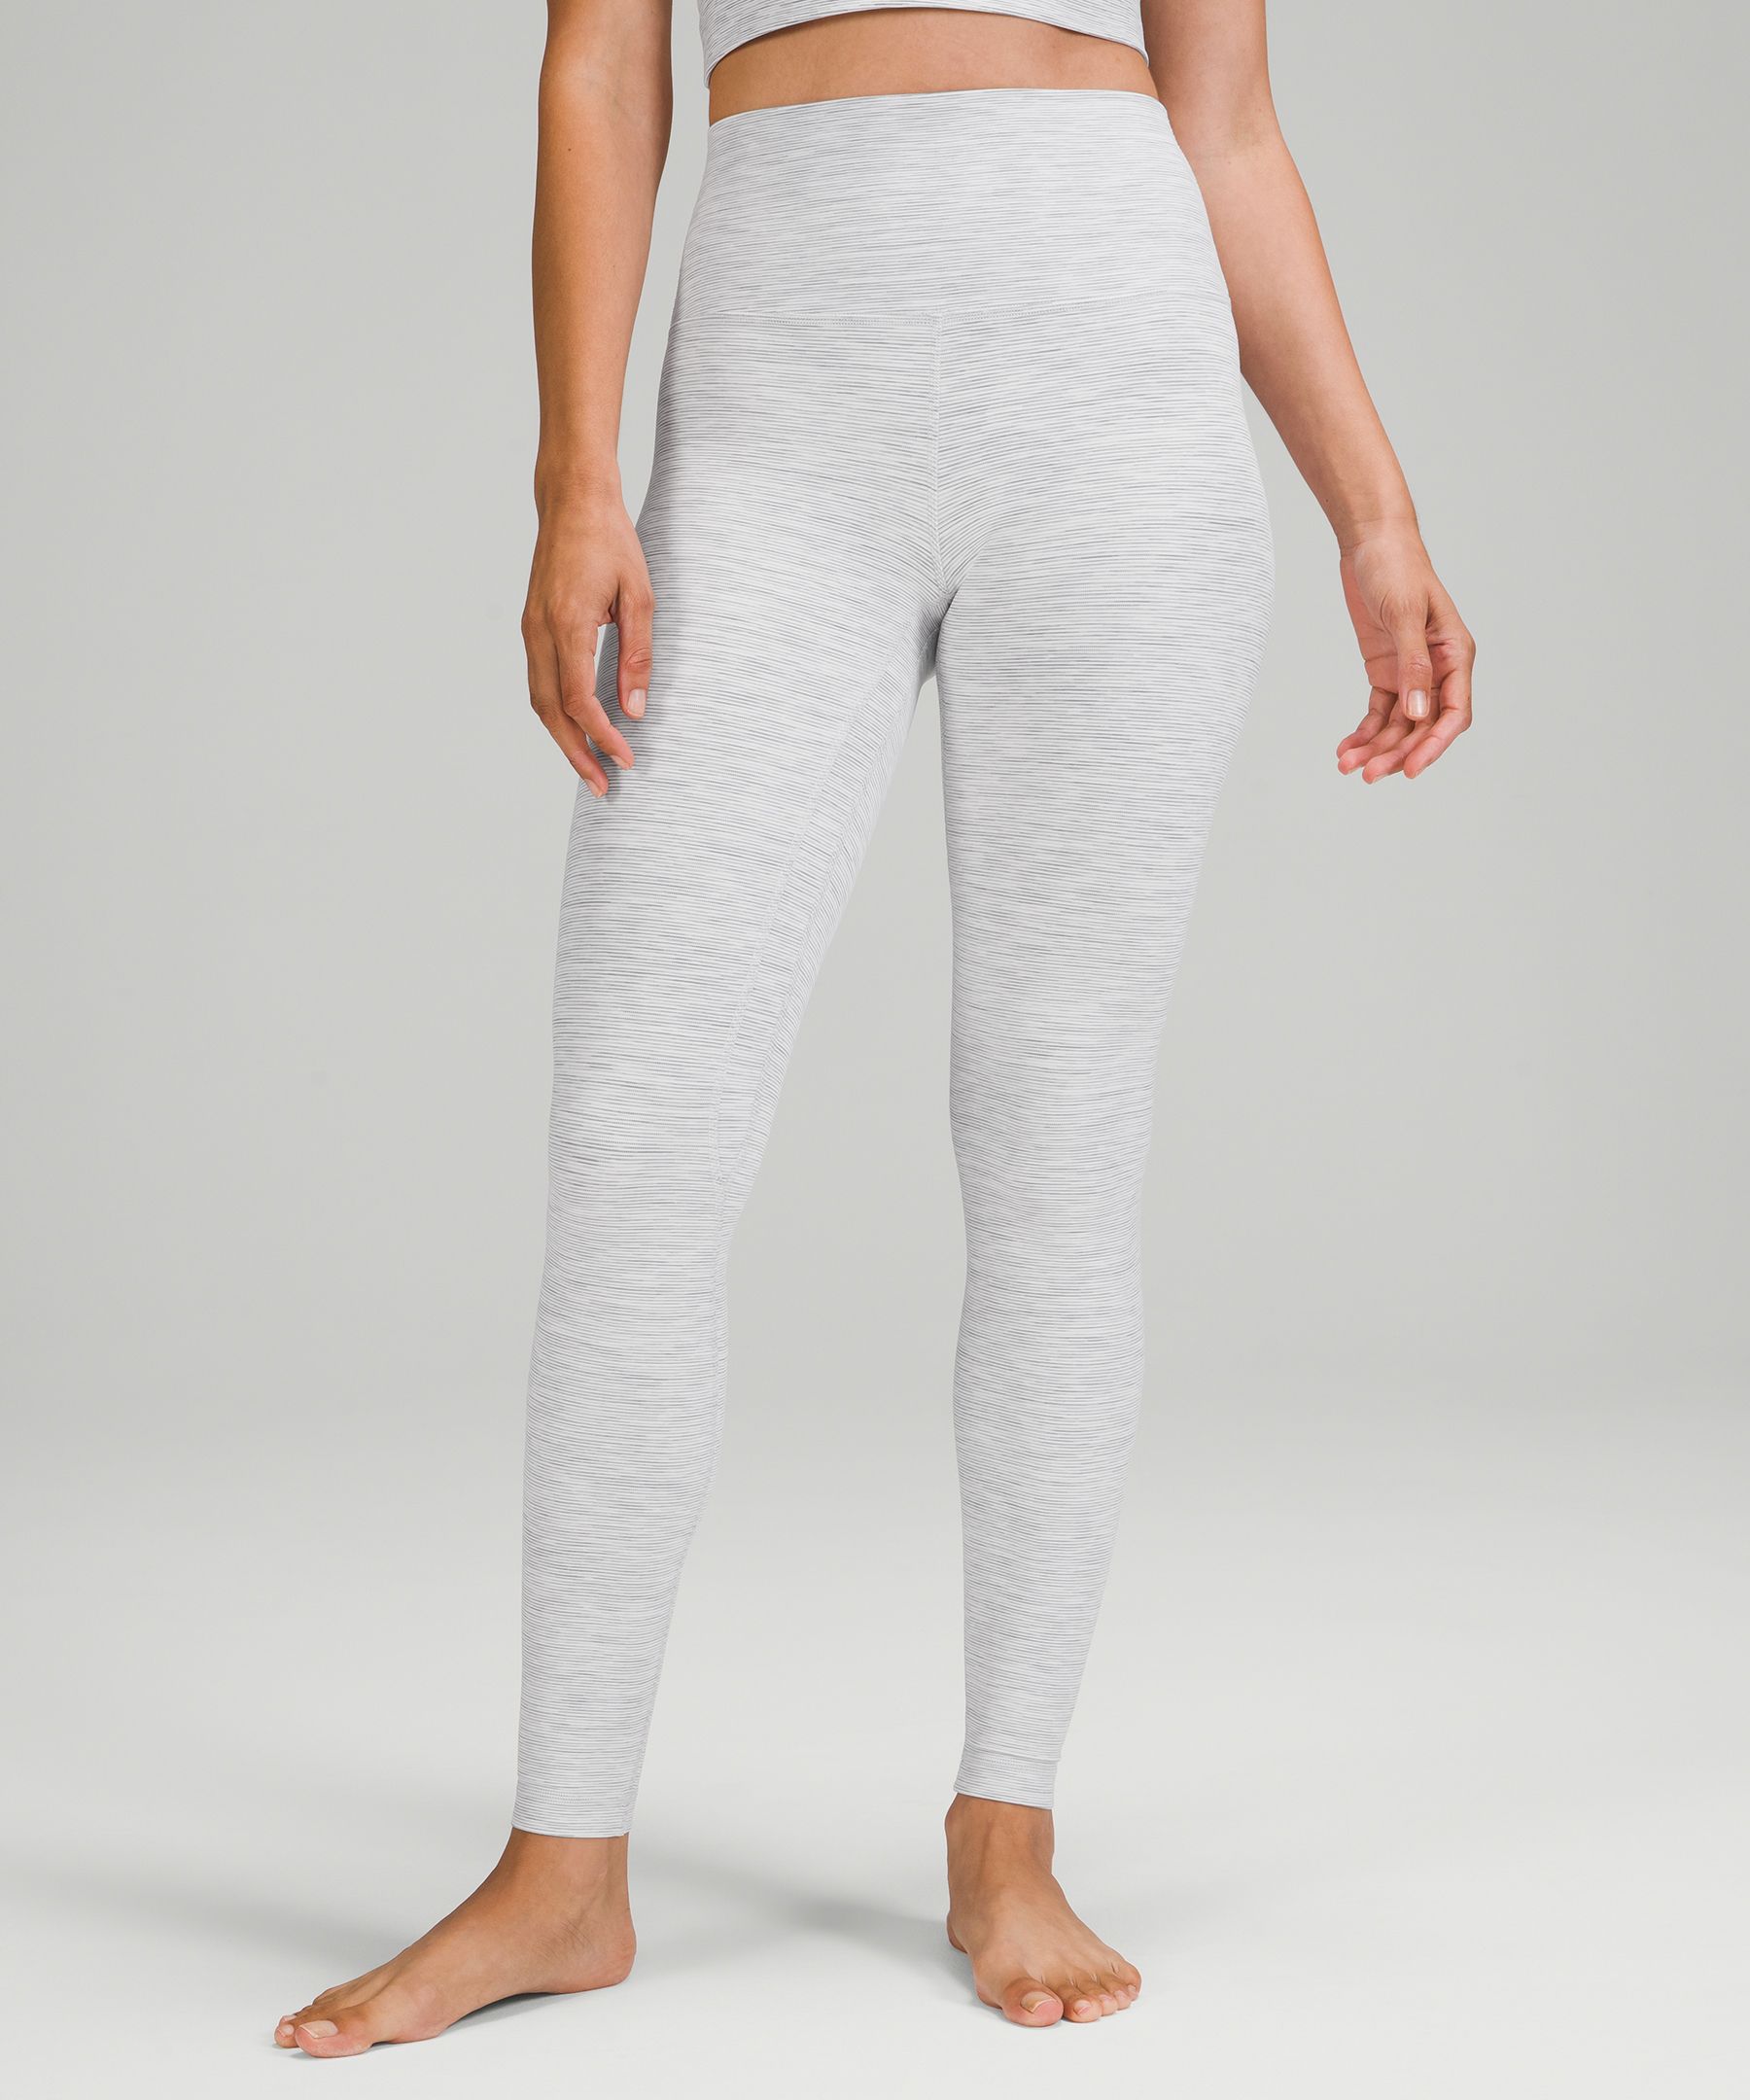 Lululemon Align™ High-rise Pants 28" In Wee Are From Space Nimbus Battleship